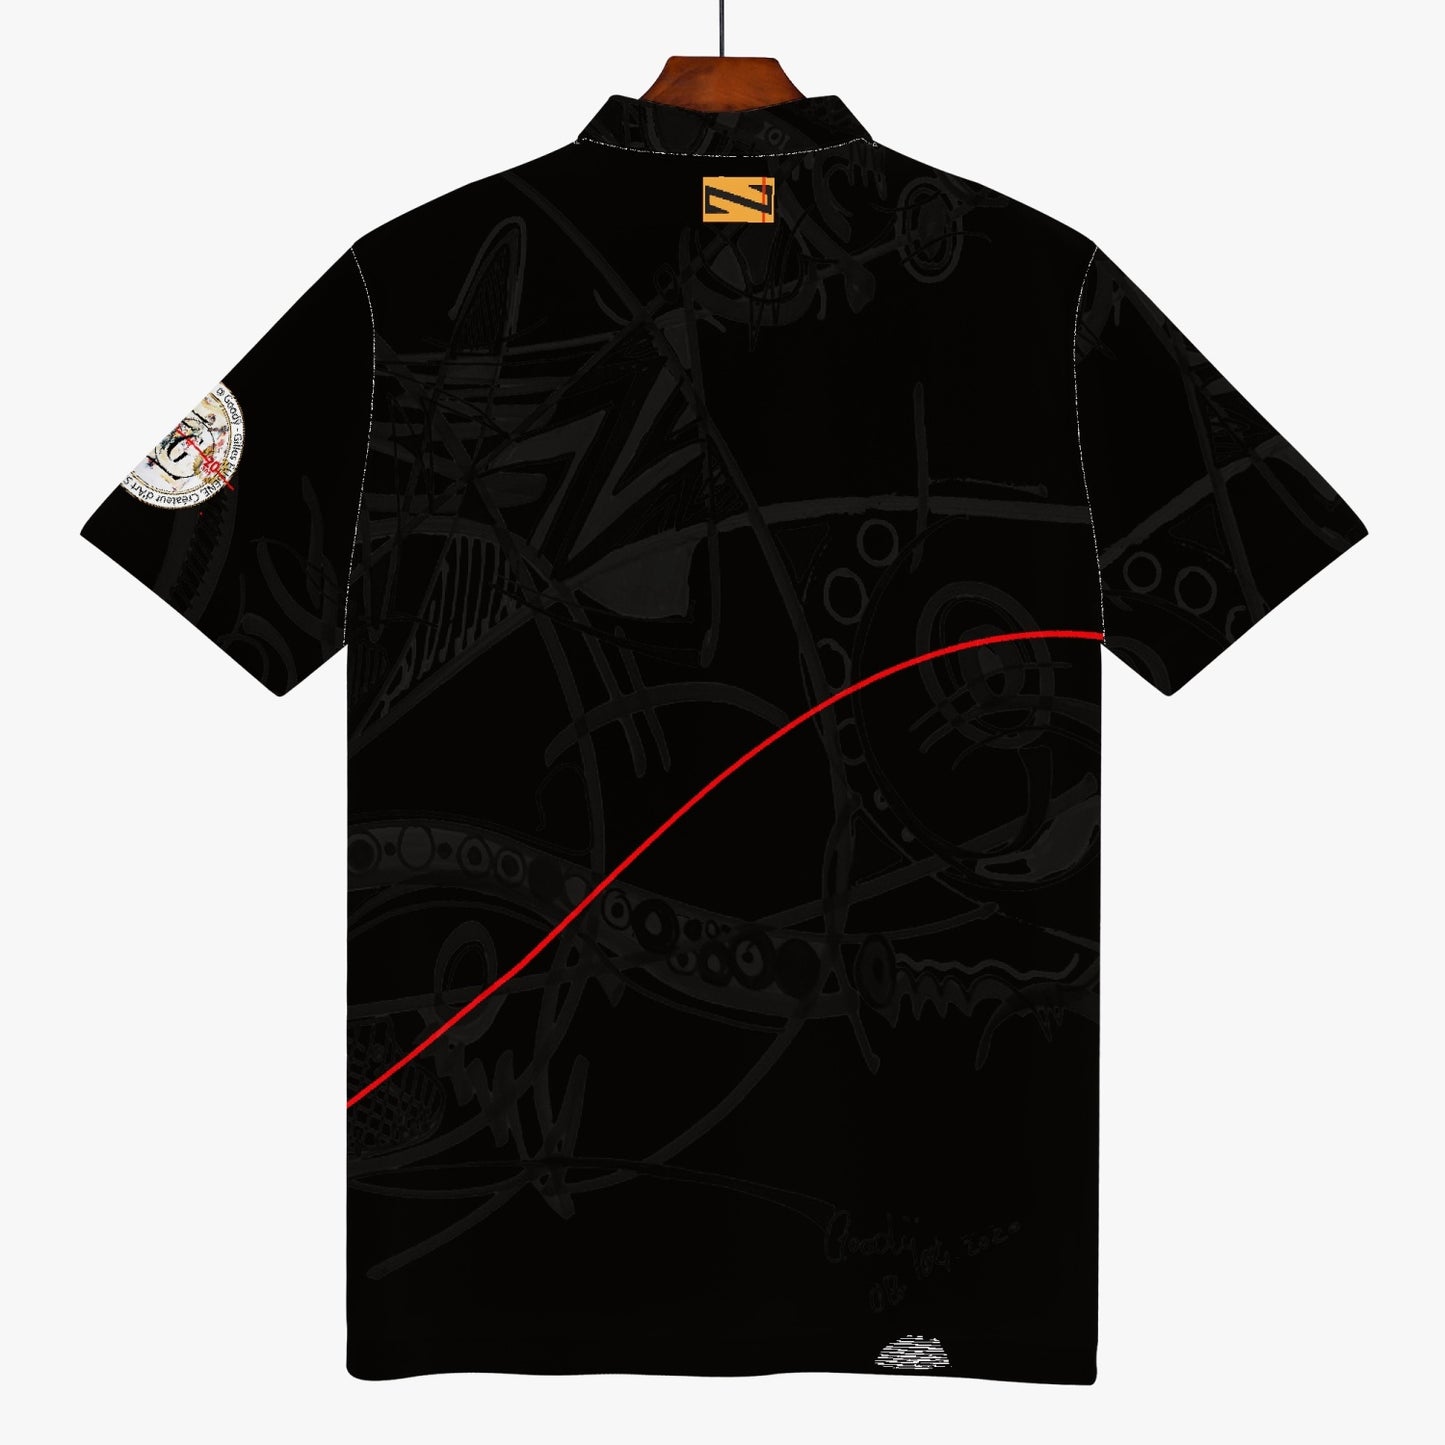 All-over polo shirt "Linearity"